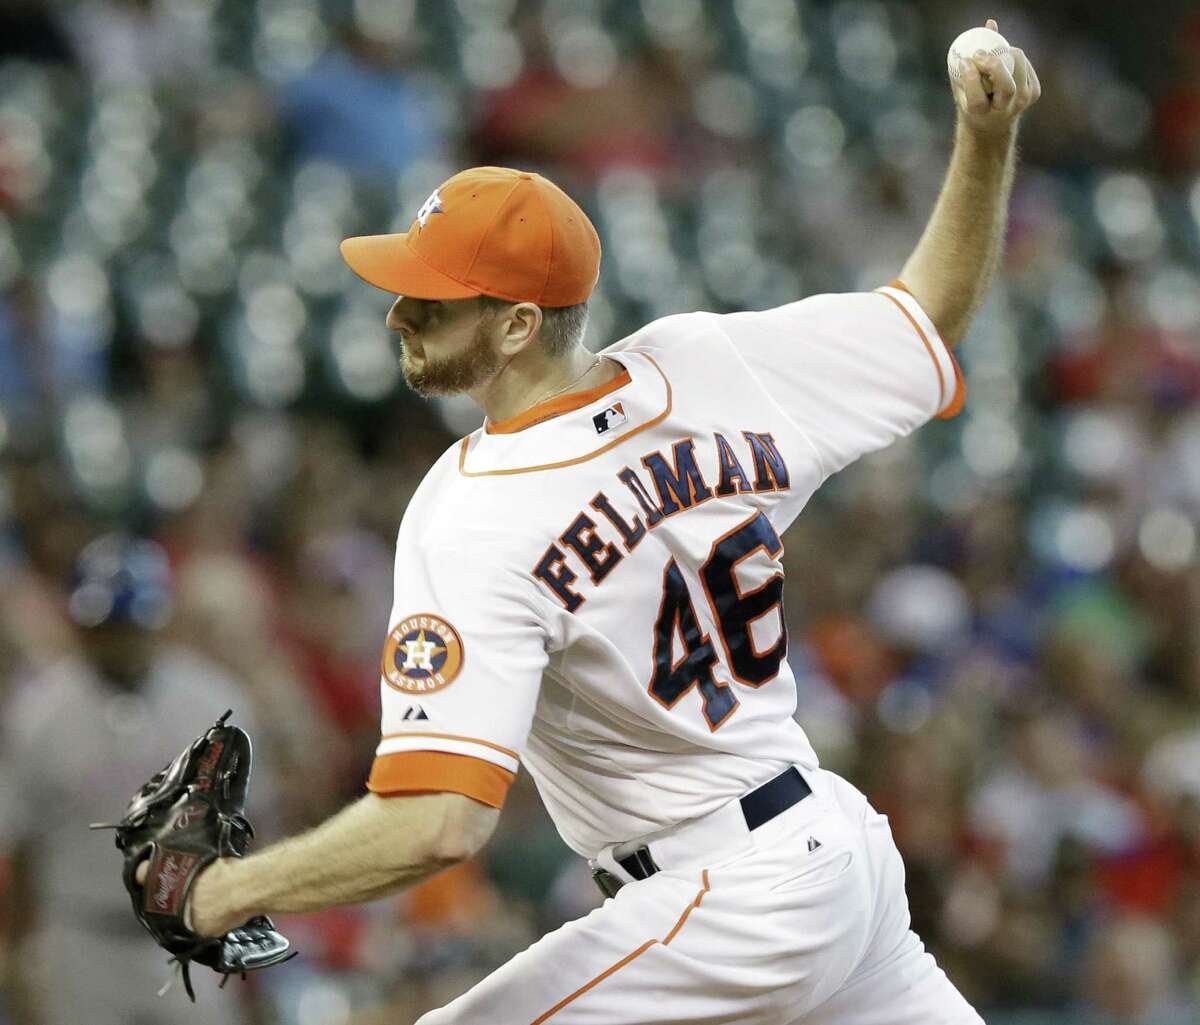 Houston's Scott Feldman struck out five and walked one in his three-hit shutout of the Rangers, his former club. It was his second complete game in August.